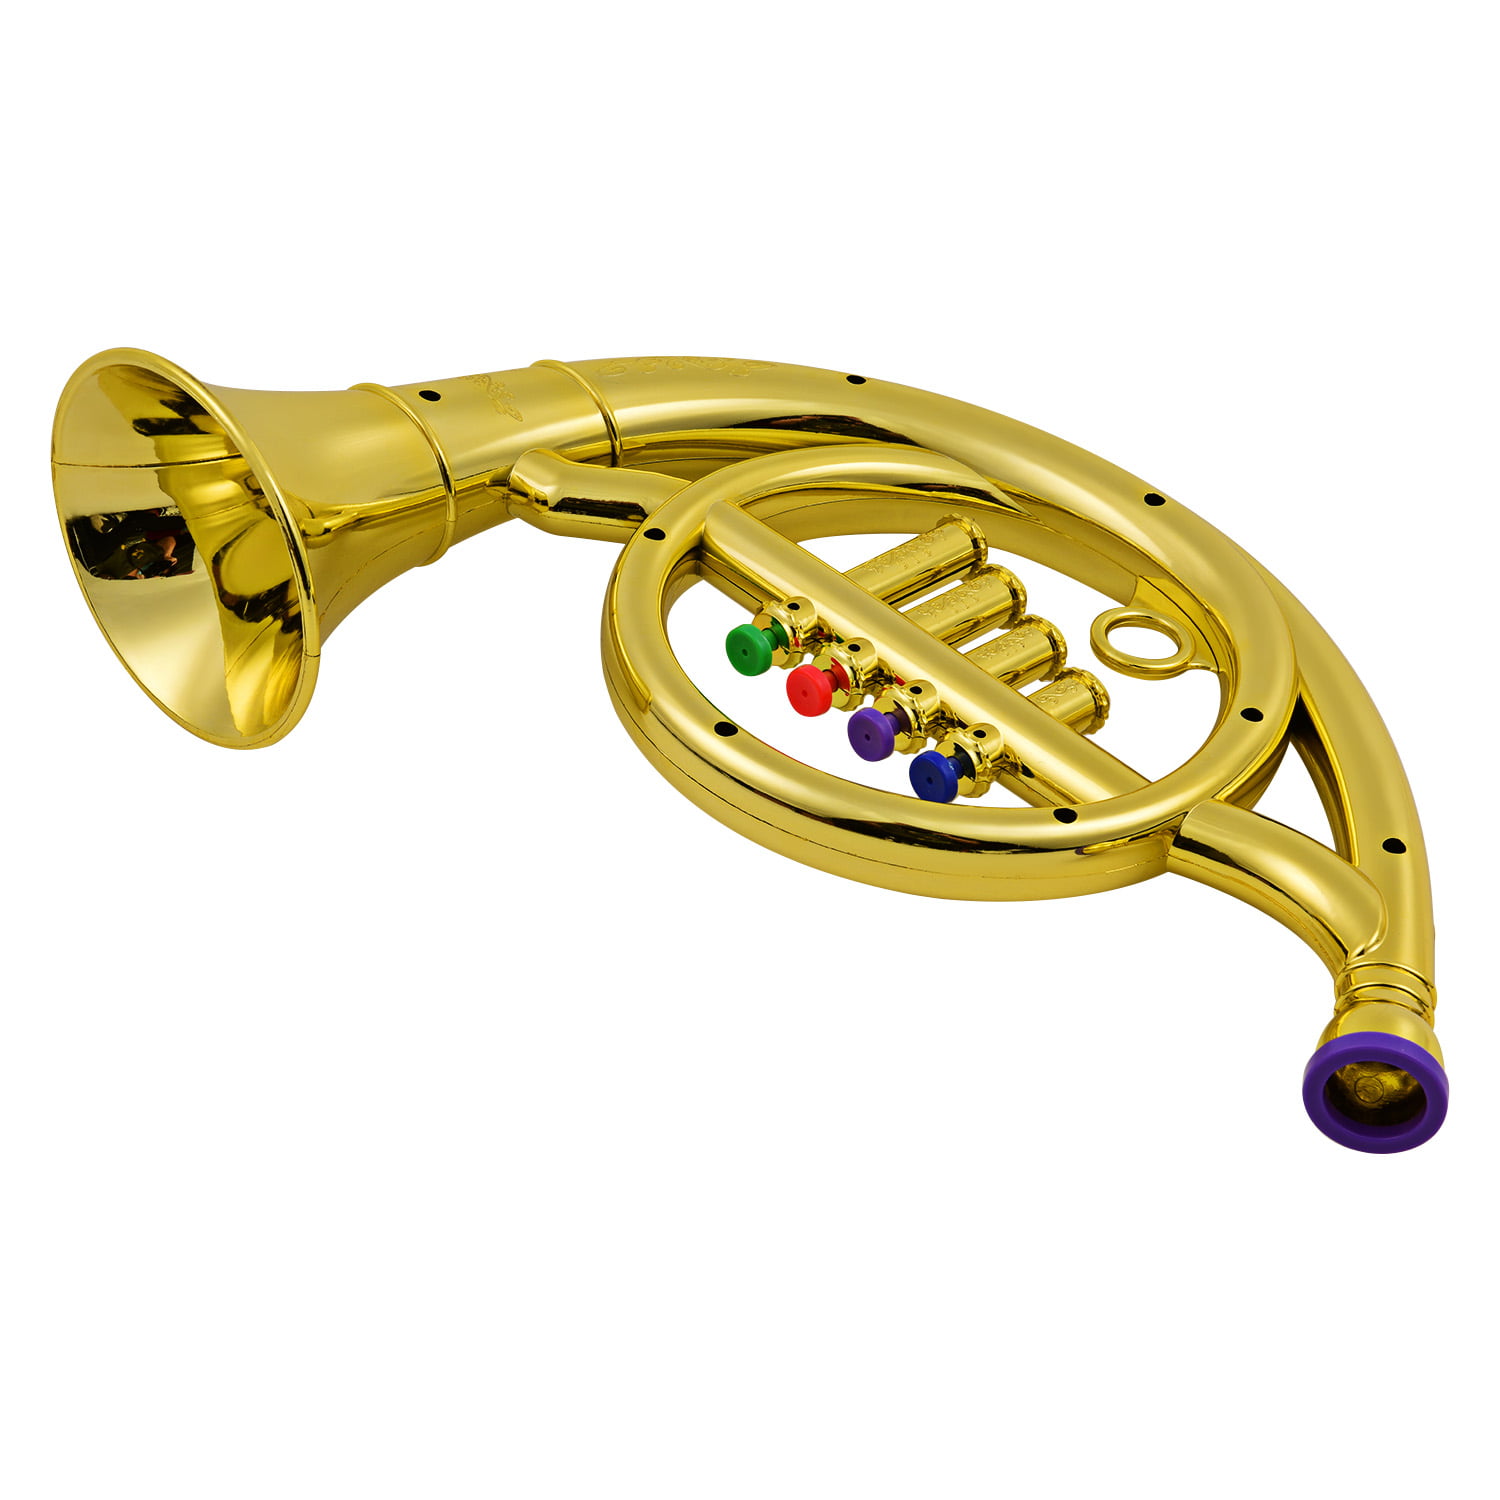 Musical Wind Instruments French Horn for Kids with 4 Colored Keys V8S1 